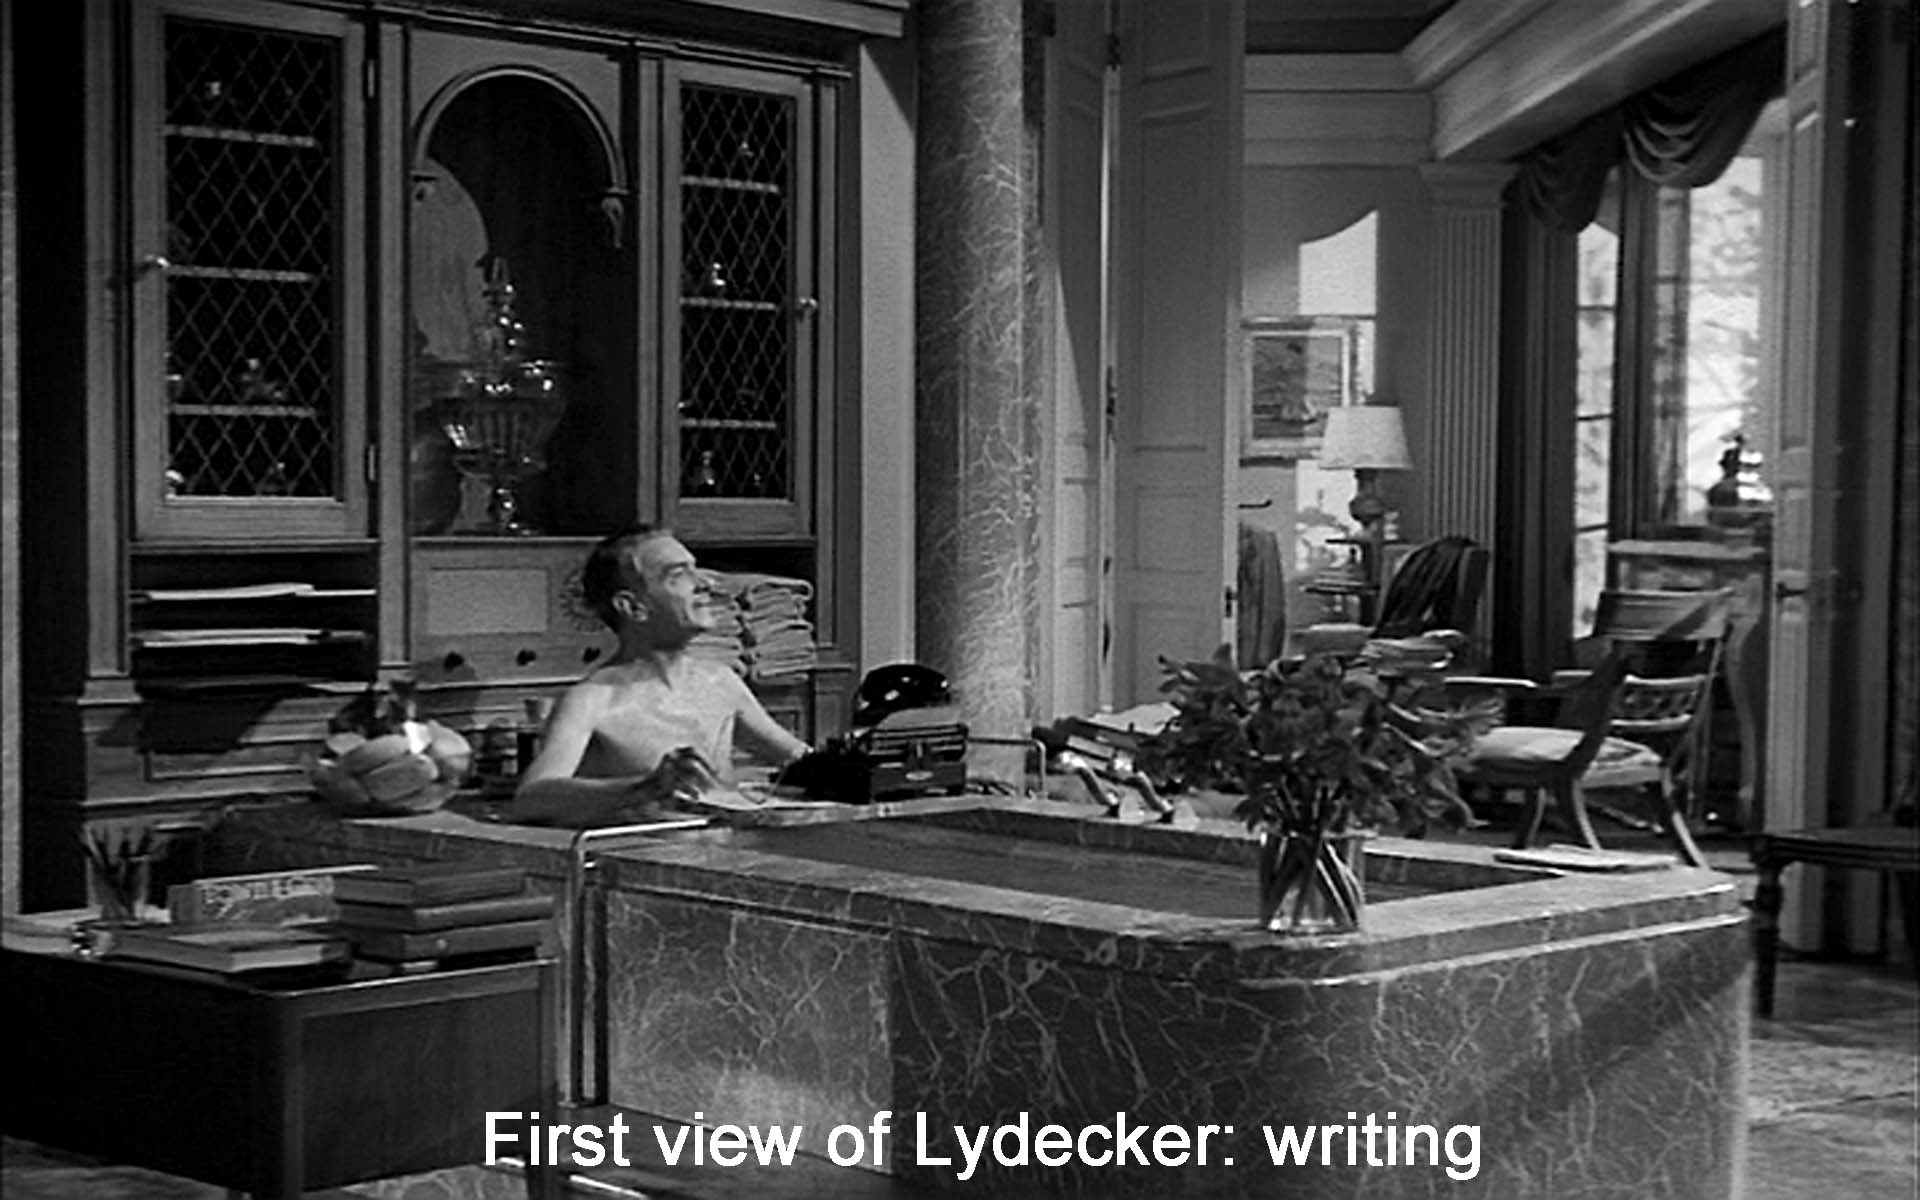 First view of Lydecker: writing